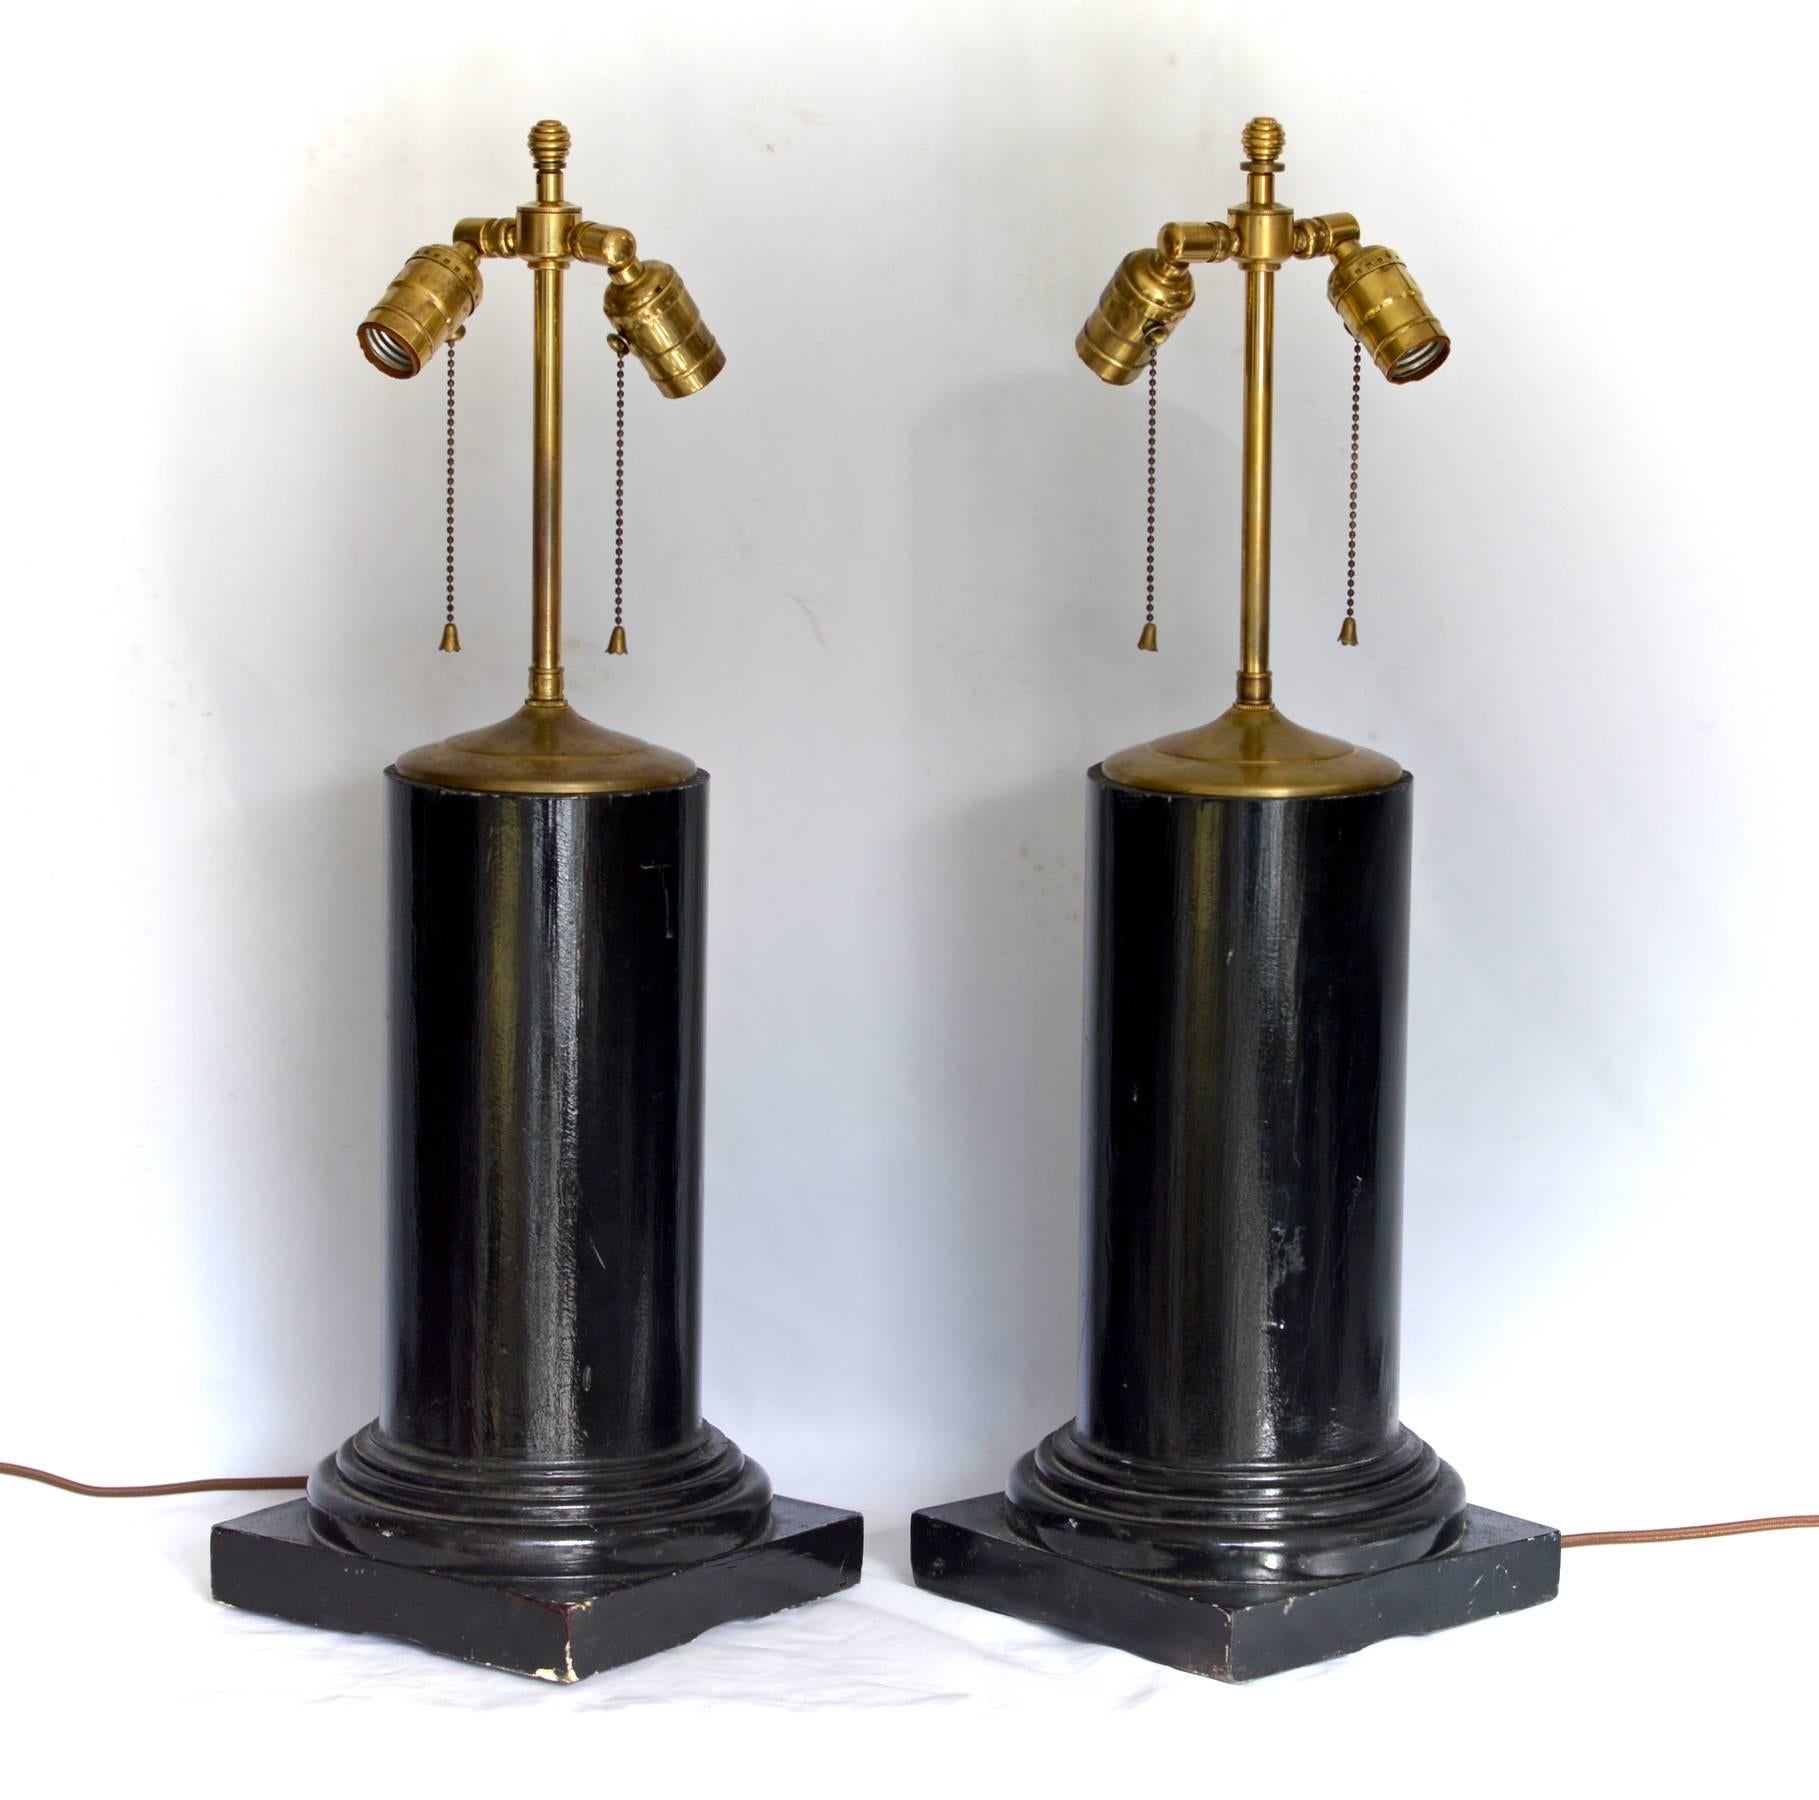 A stunning pair of ebonized column form table lamps having vintage brass double socket clusters and patinated brass vase tops. Just rewired with brown cloth wrapped cords, the architectural forms are ready to add a stately and classical look to any